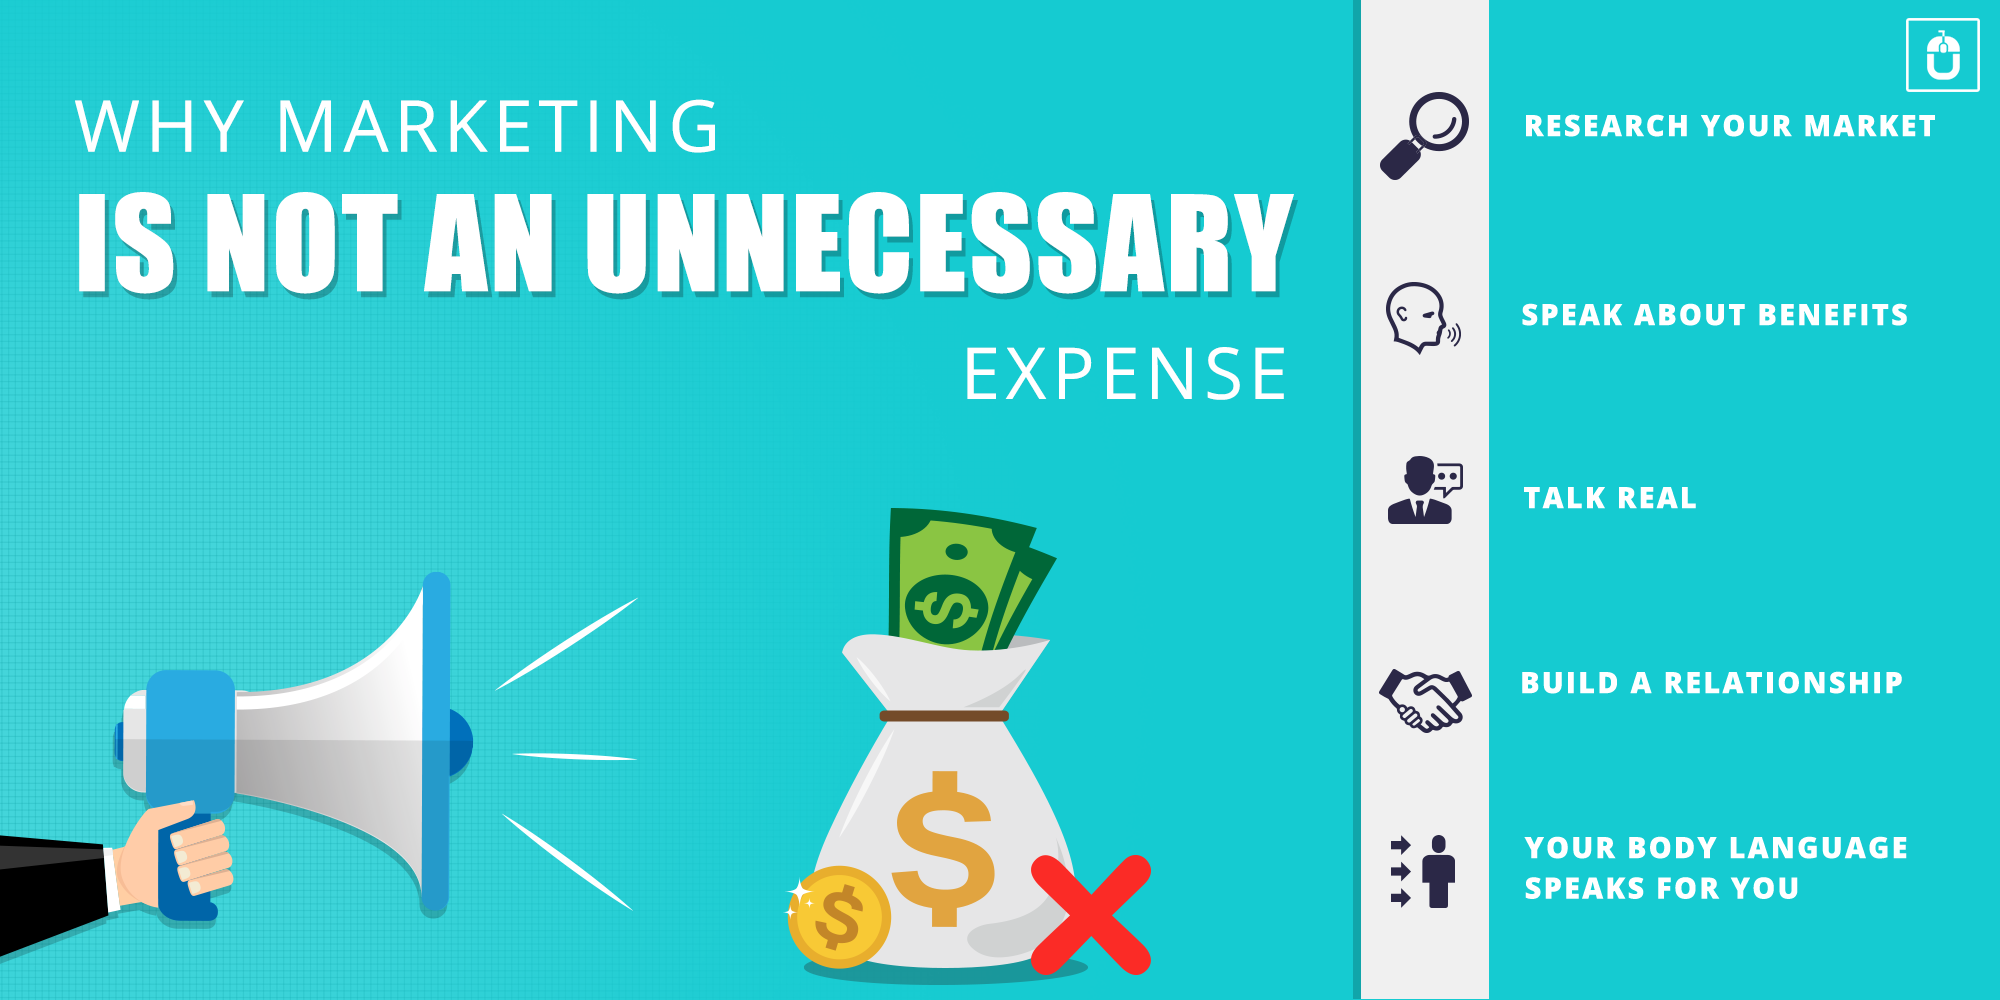 Why Marketing Is Not An Unnecessary Expense